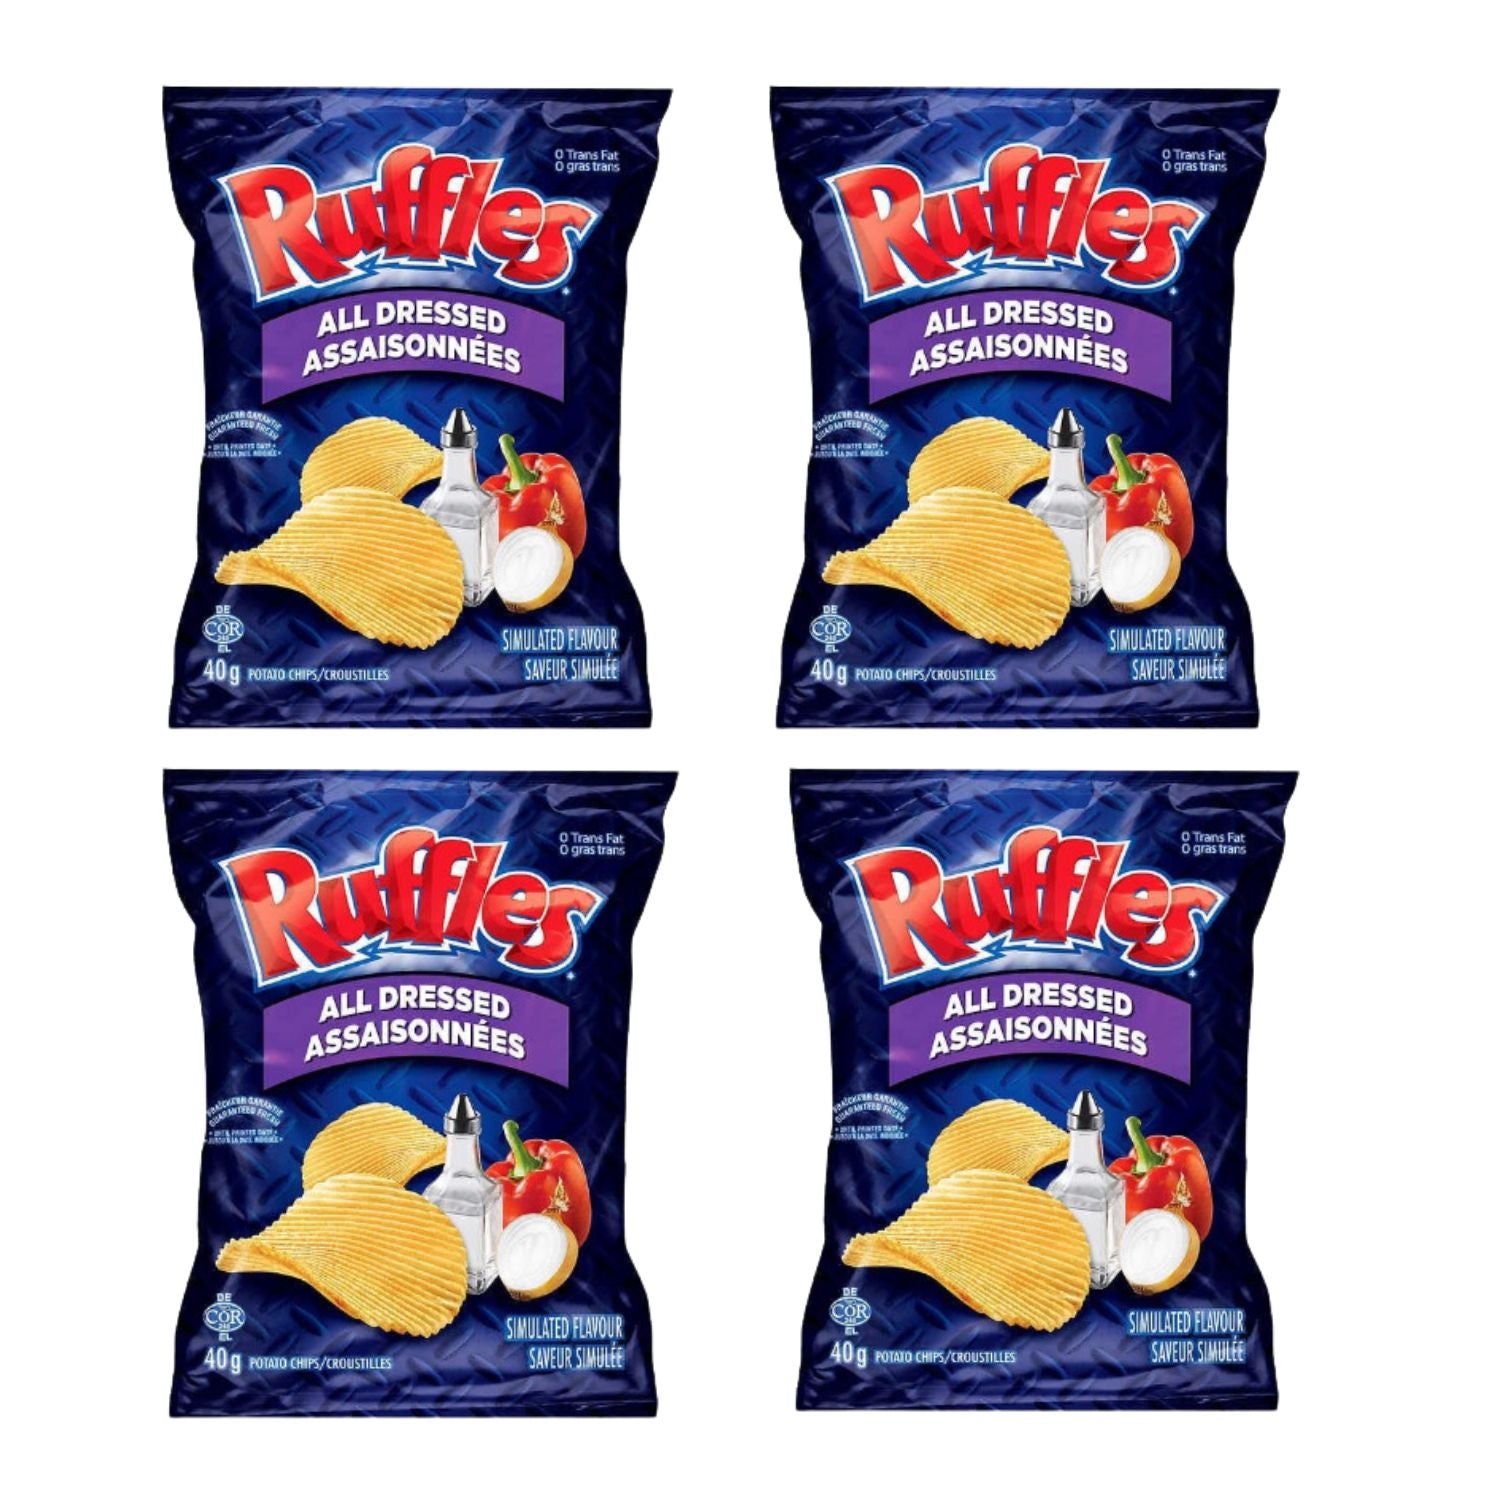 Ruffles All Dressed Chips Snack Bag pack of 4